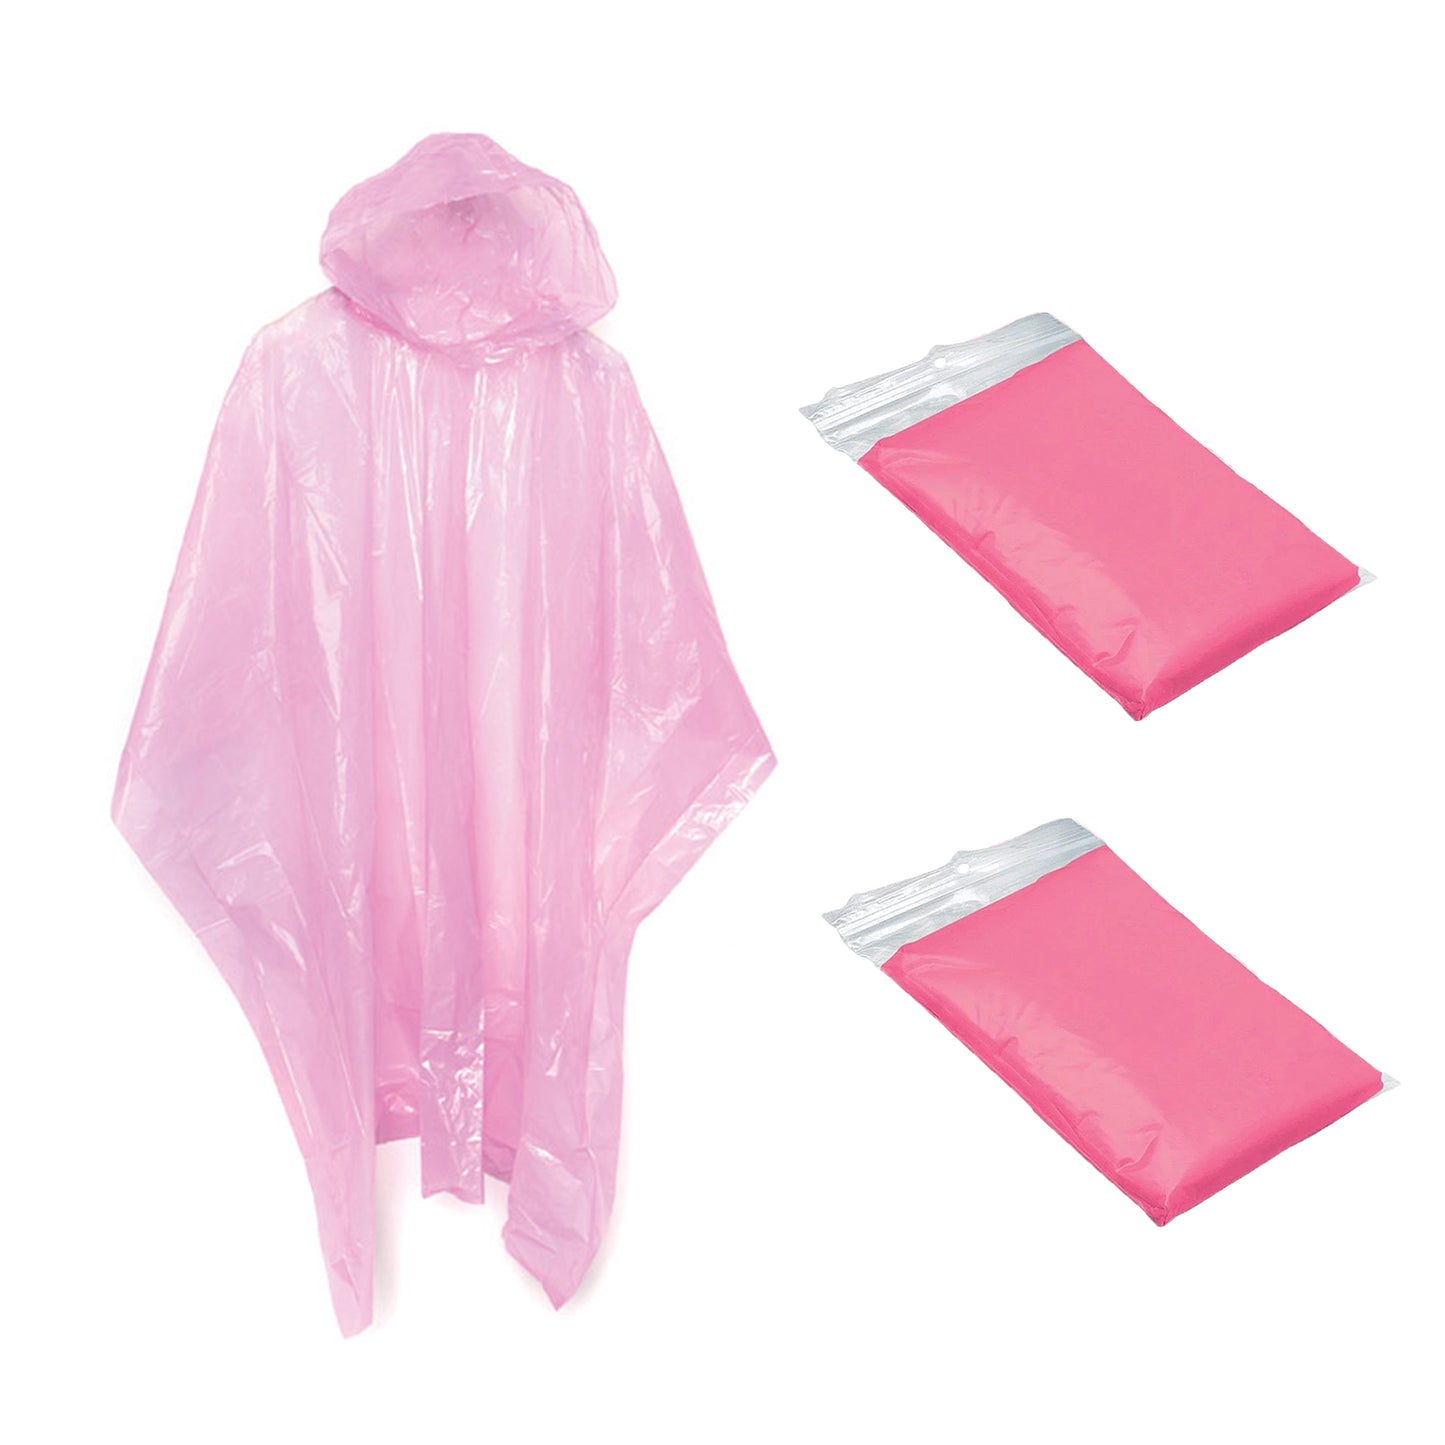 2x Pink Adult Waterproof Hooded Rain Poncho Mac Coat for Theme Parks & Festivals